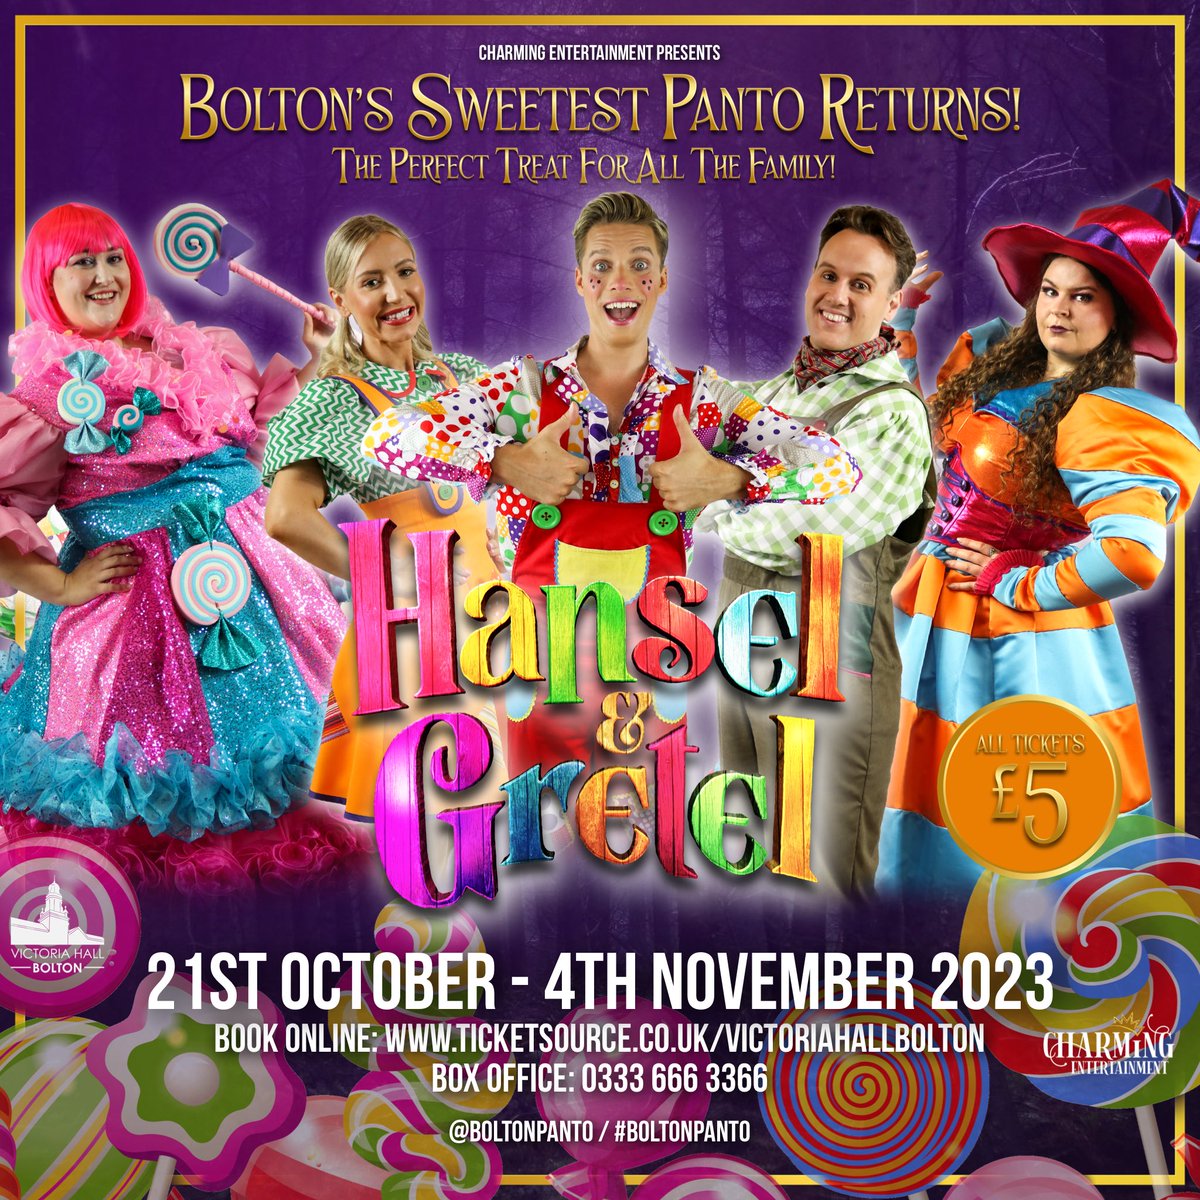 🍭 HANSEL AND GRETEL 🍬 We delighted to announce that our October Half Term Panto this year will be, Hansel and Gretel - an all new production starring Bolton Favourite BYRON WITCHELL (Chester) as Hansel! 🎭 🎟️ ticketsource.co.uk/victoriahallbo… #boltonpanto #boostingbolton